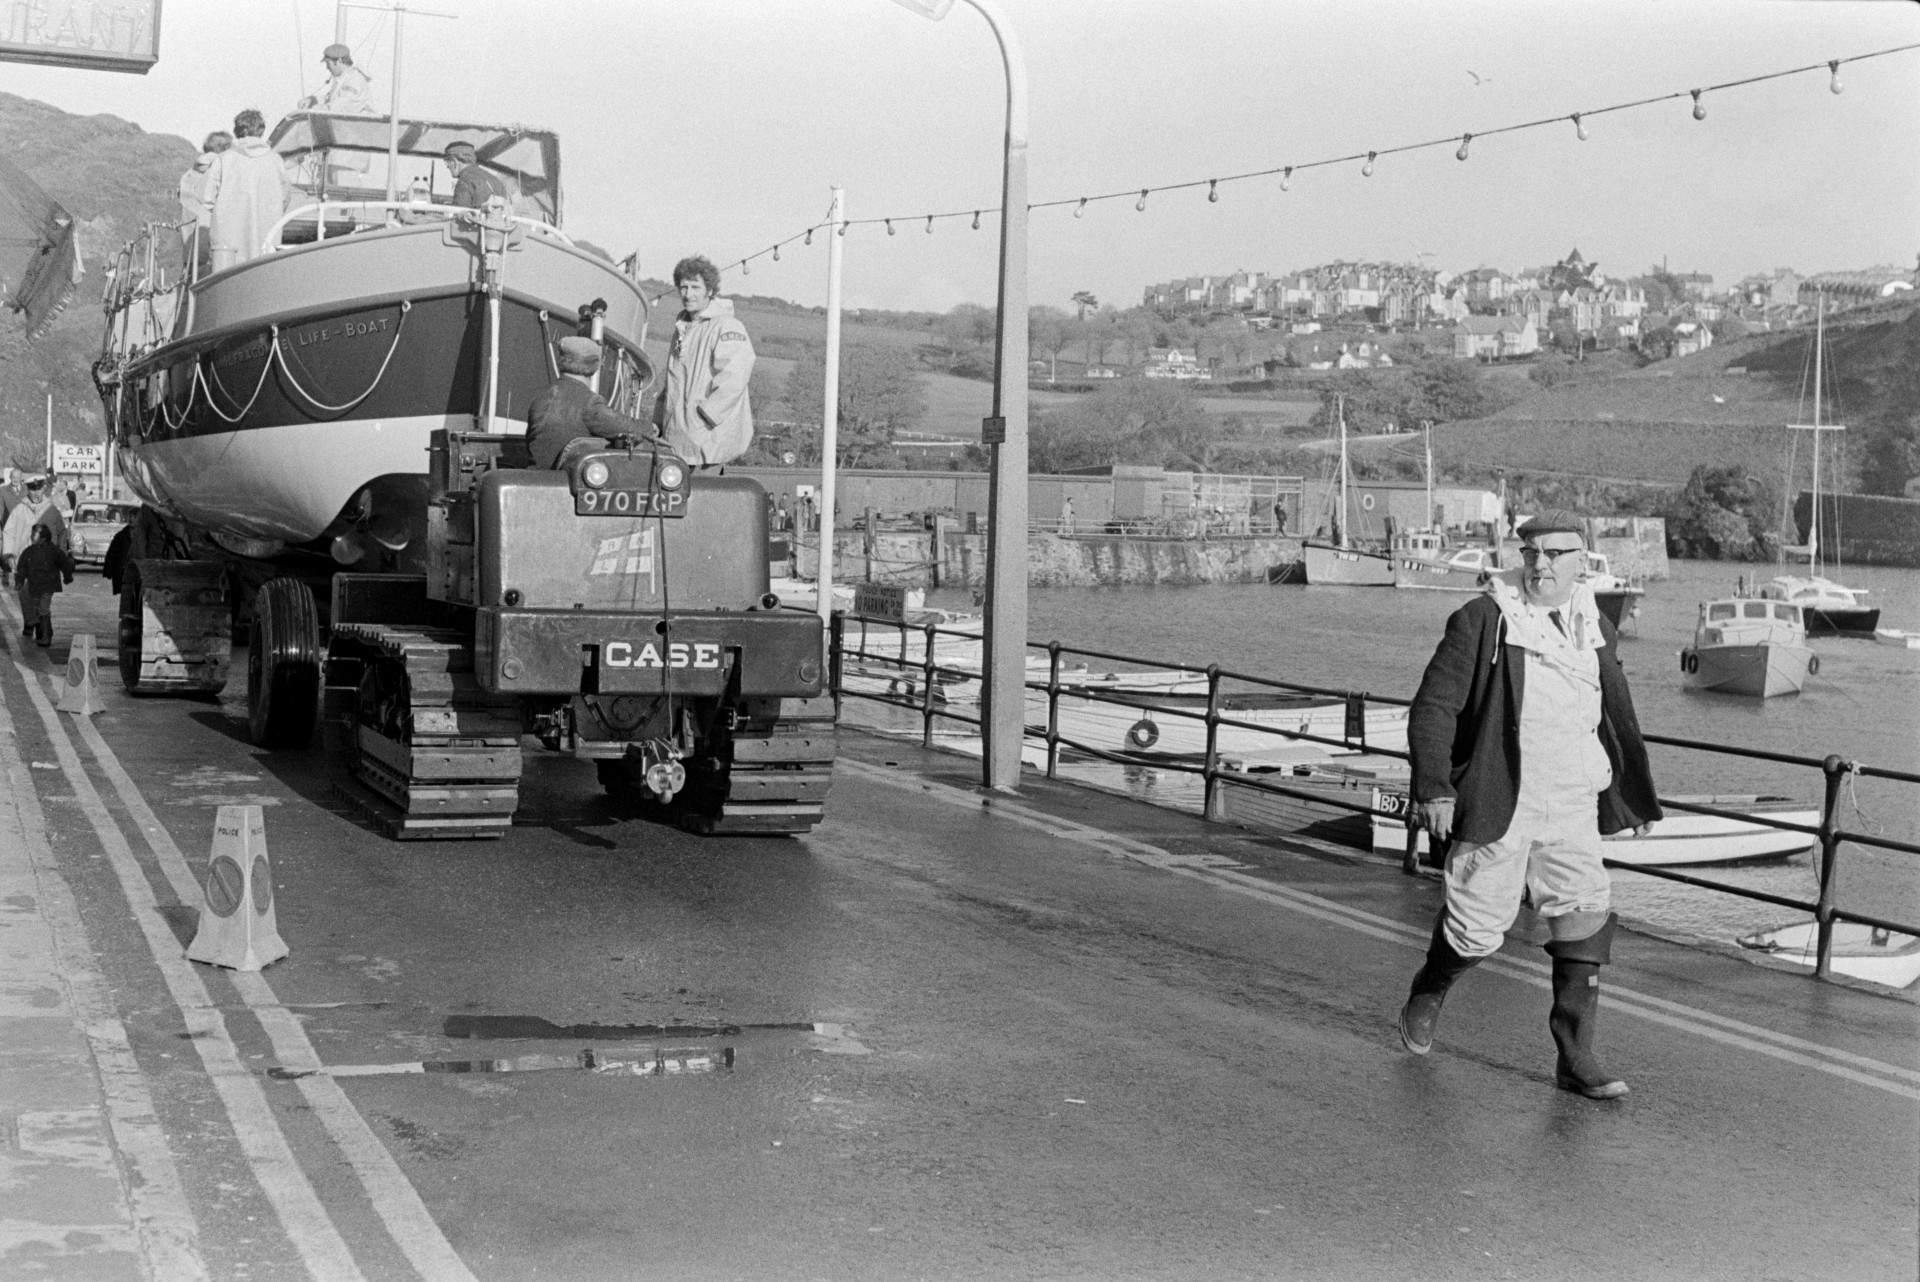 A life boat being transported through Ilfracombe on a vehicle with caterpillar tracks. It is passing the harbour. Boats are moored in the harbour in the background.